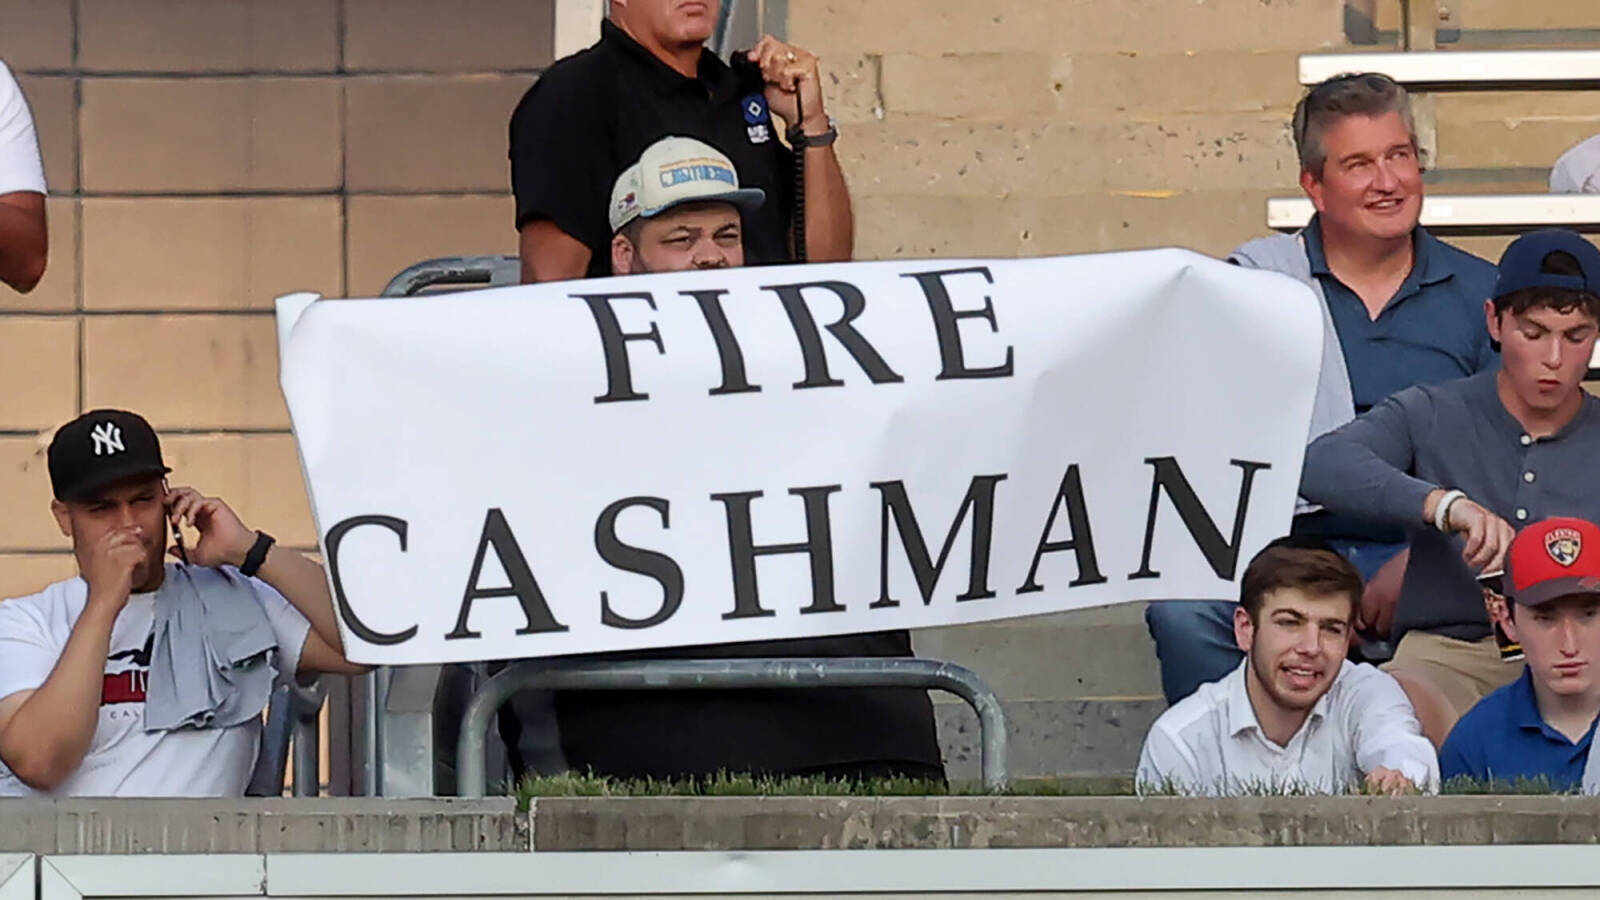 Brian Cashman could cost the Yankees a playoff berth